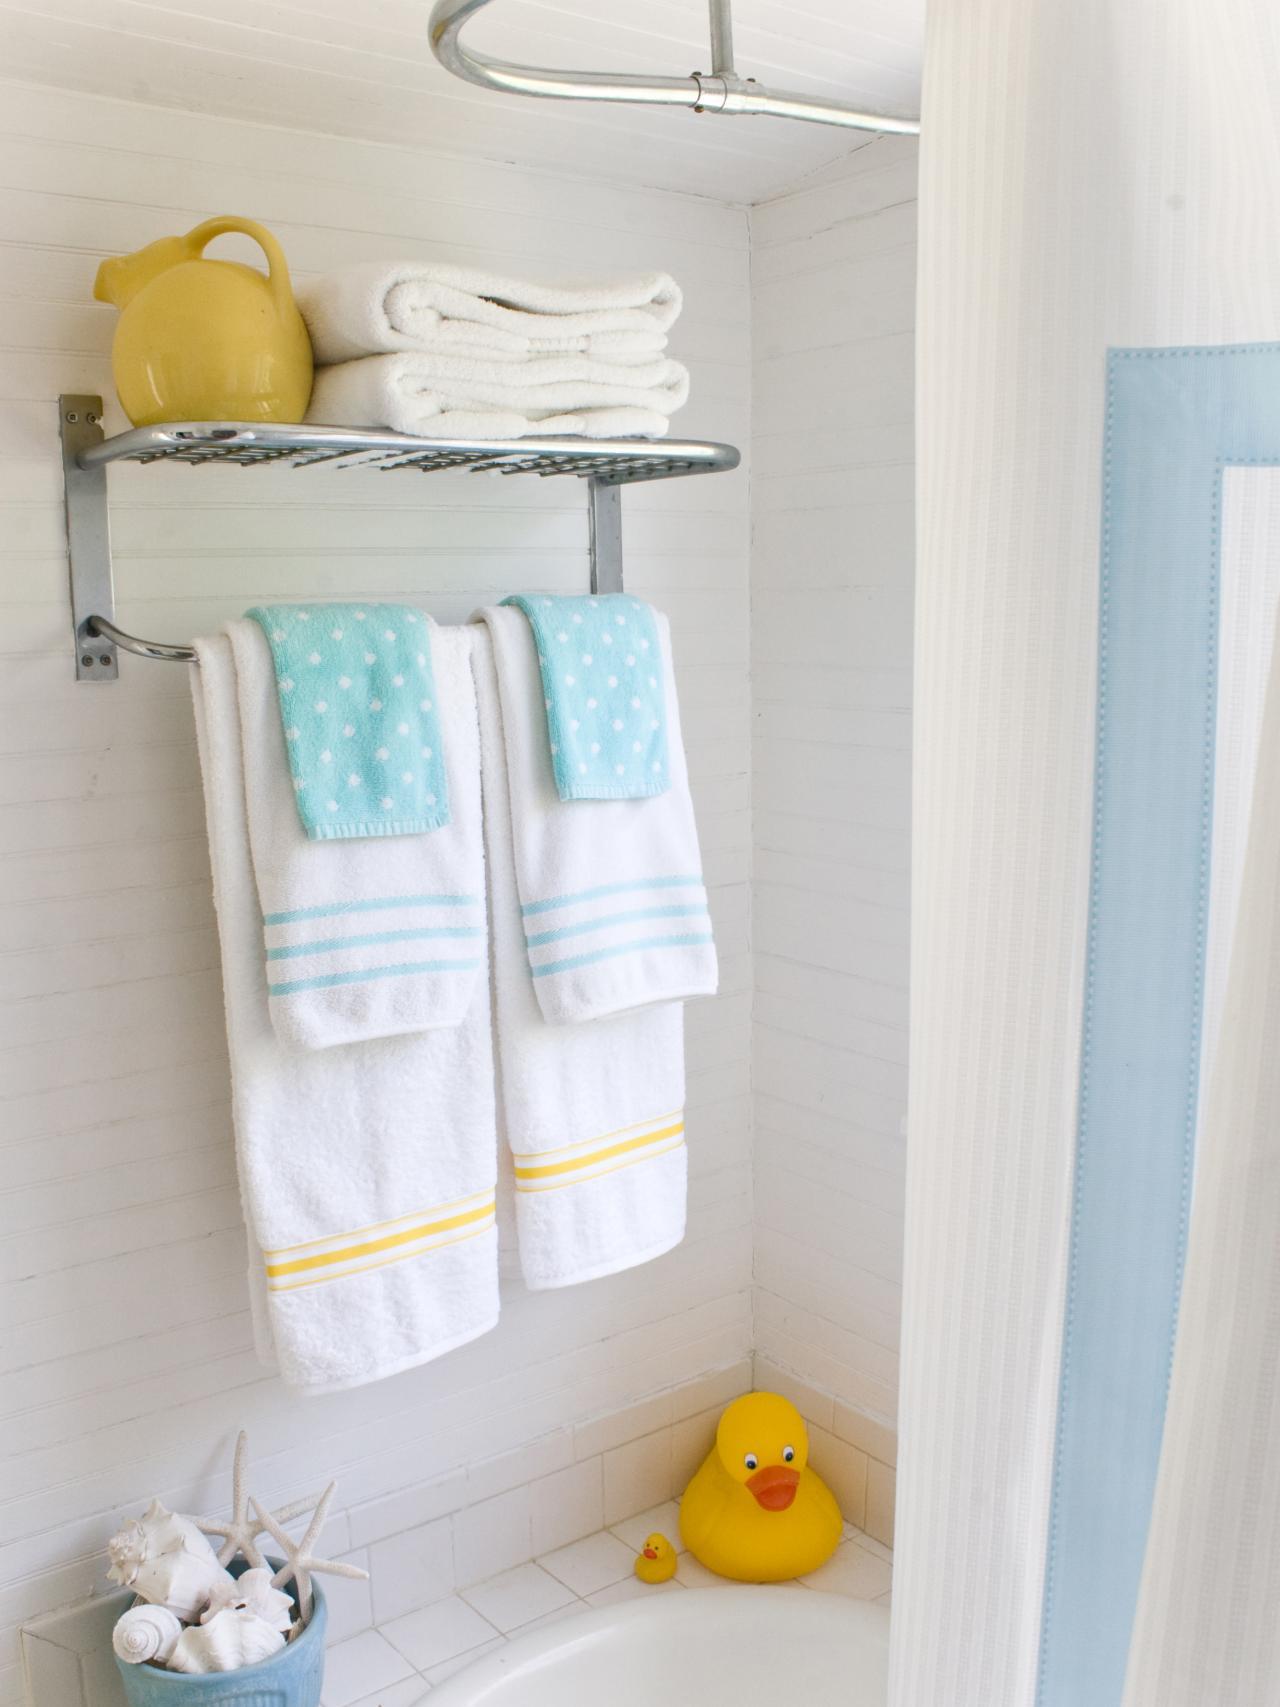 Incredible Shelf Bath Towel Delight In Bathroom Pict Of Bed And ...